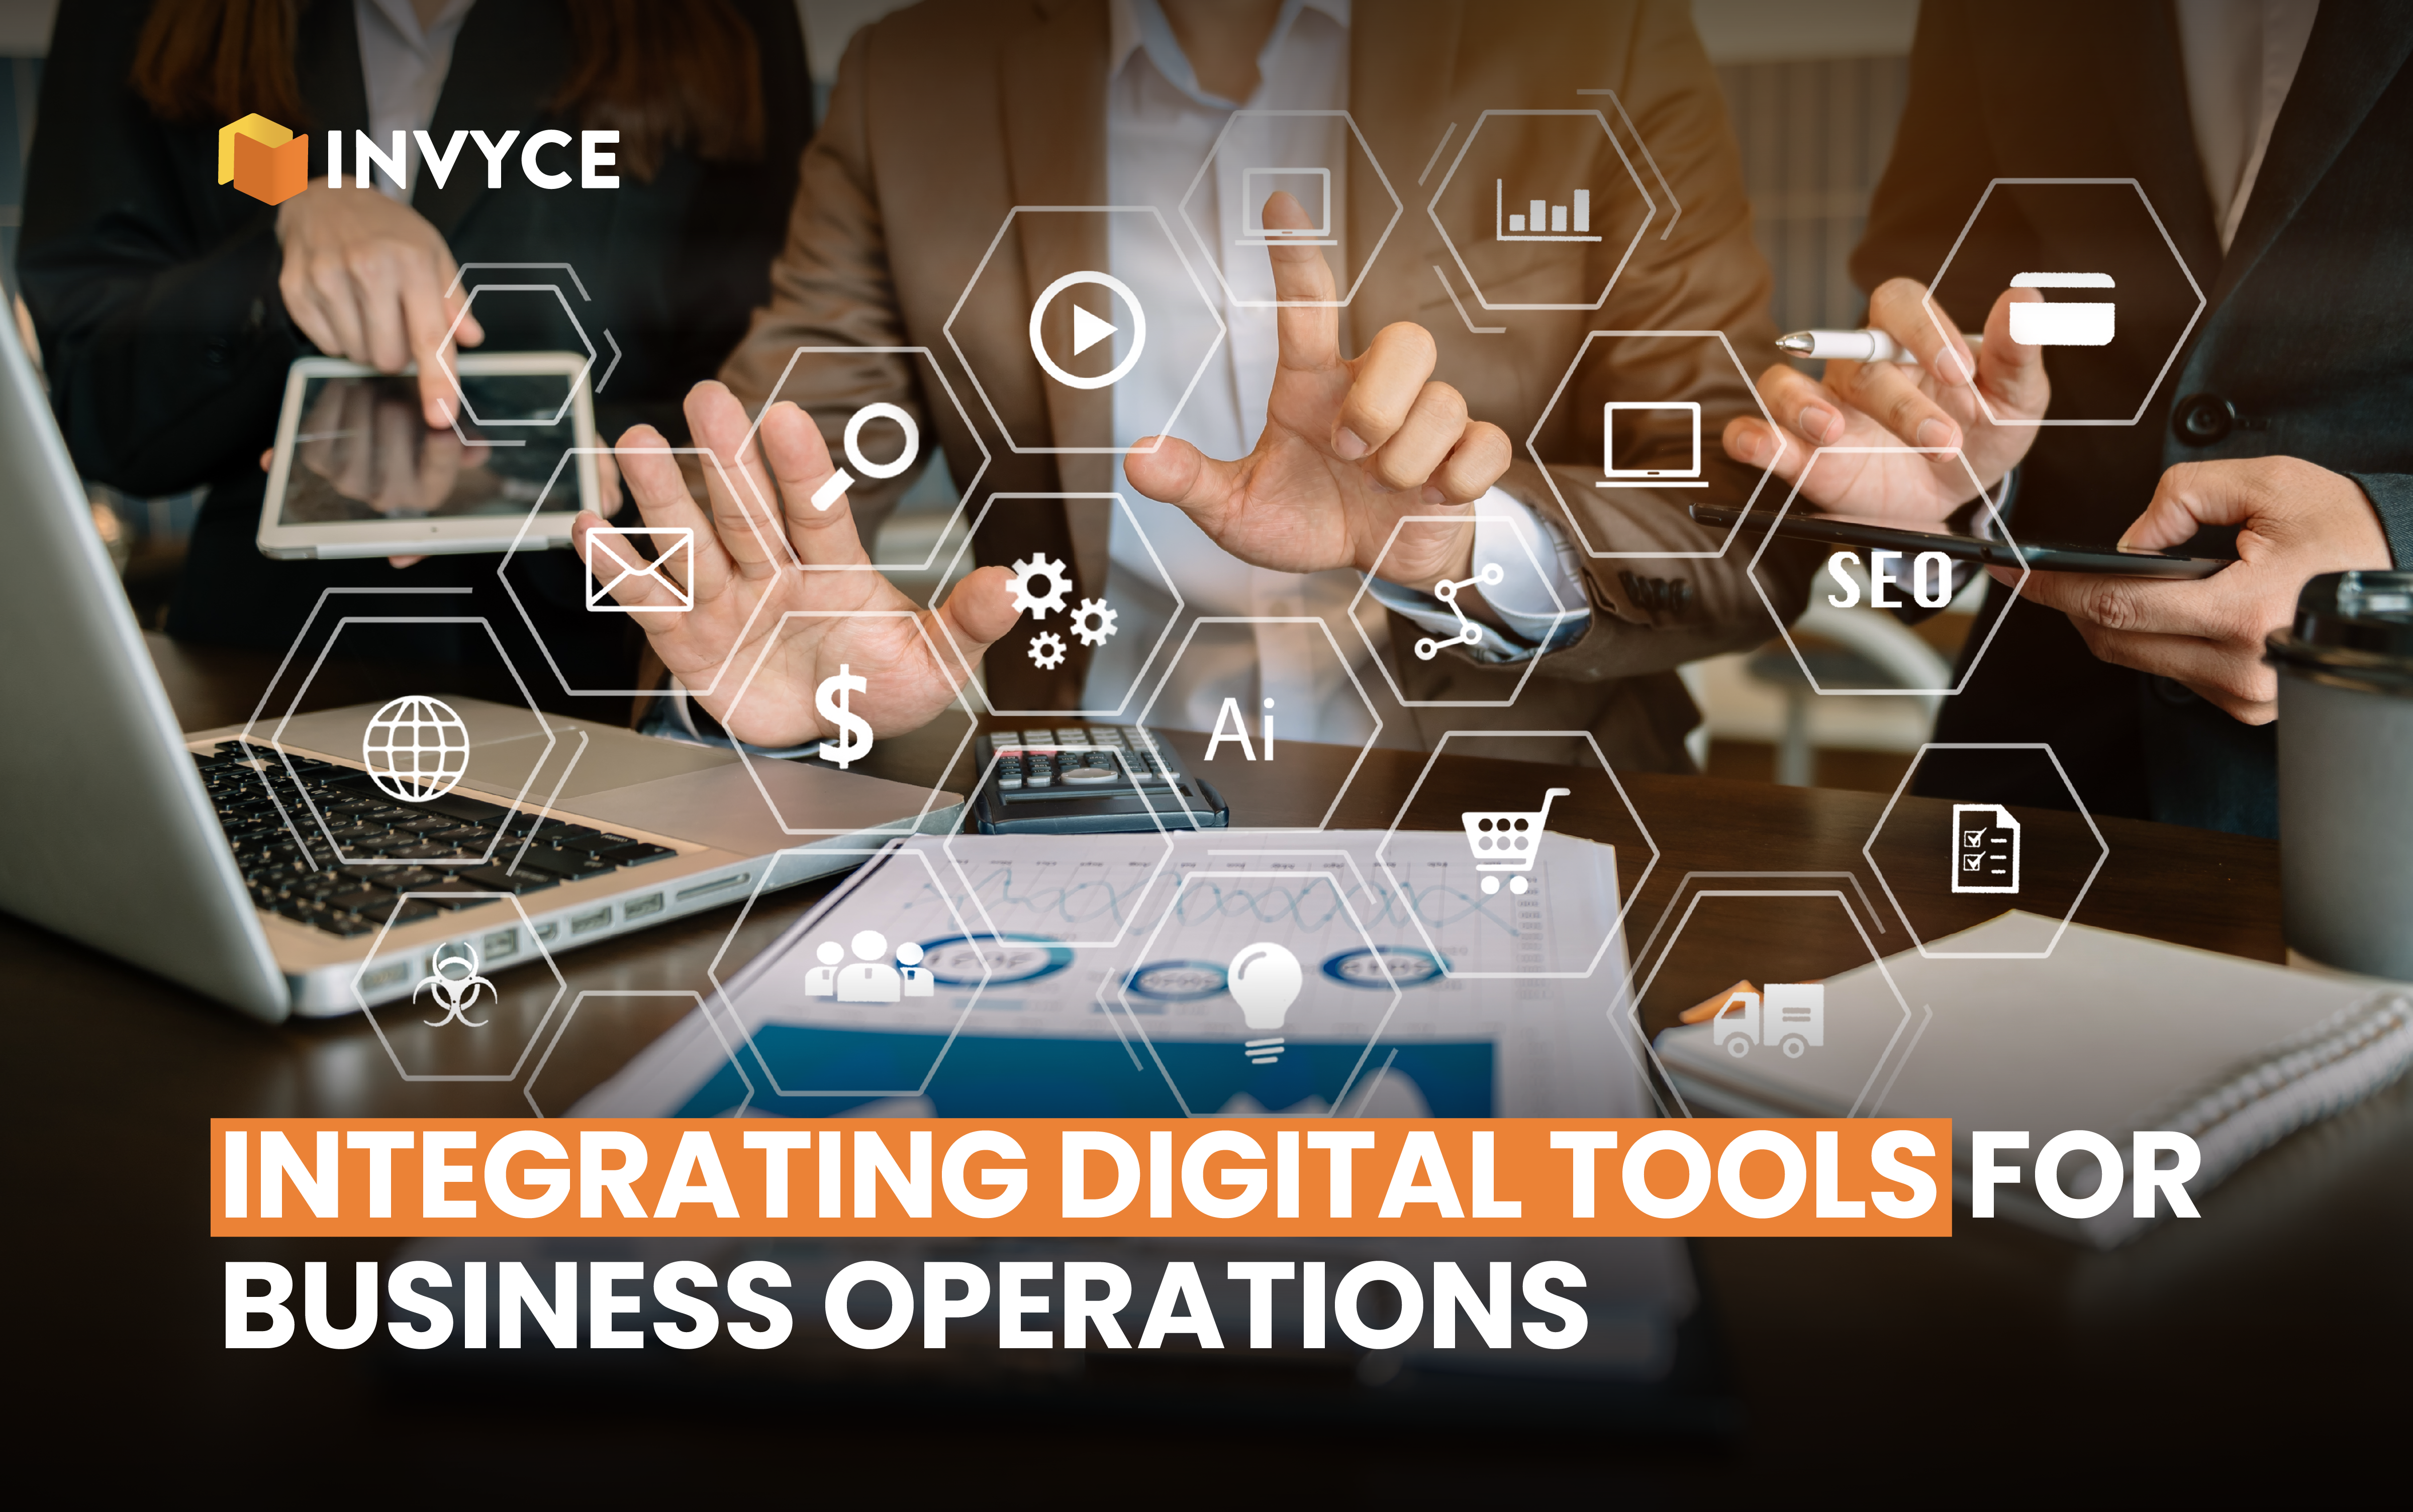 #Integrating Digital Tools for Business Operations